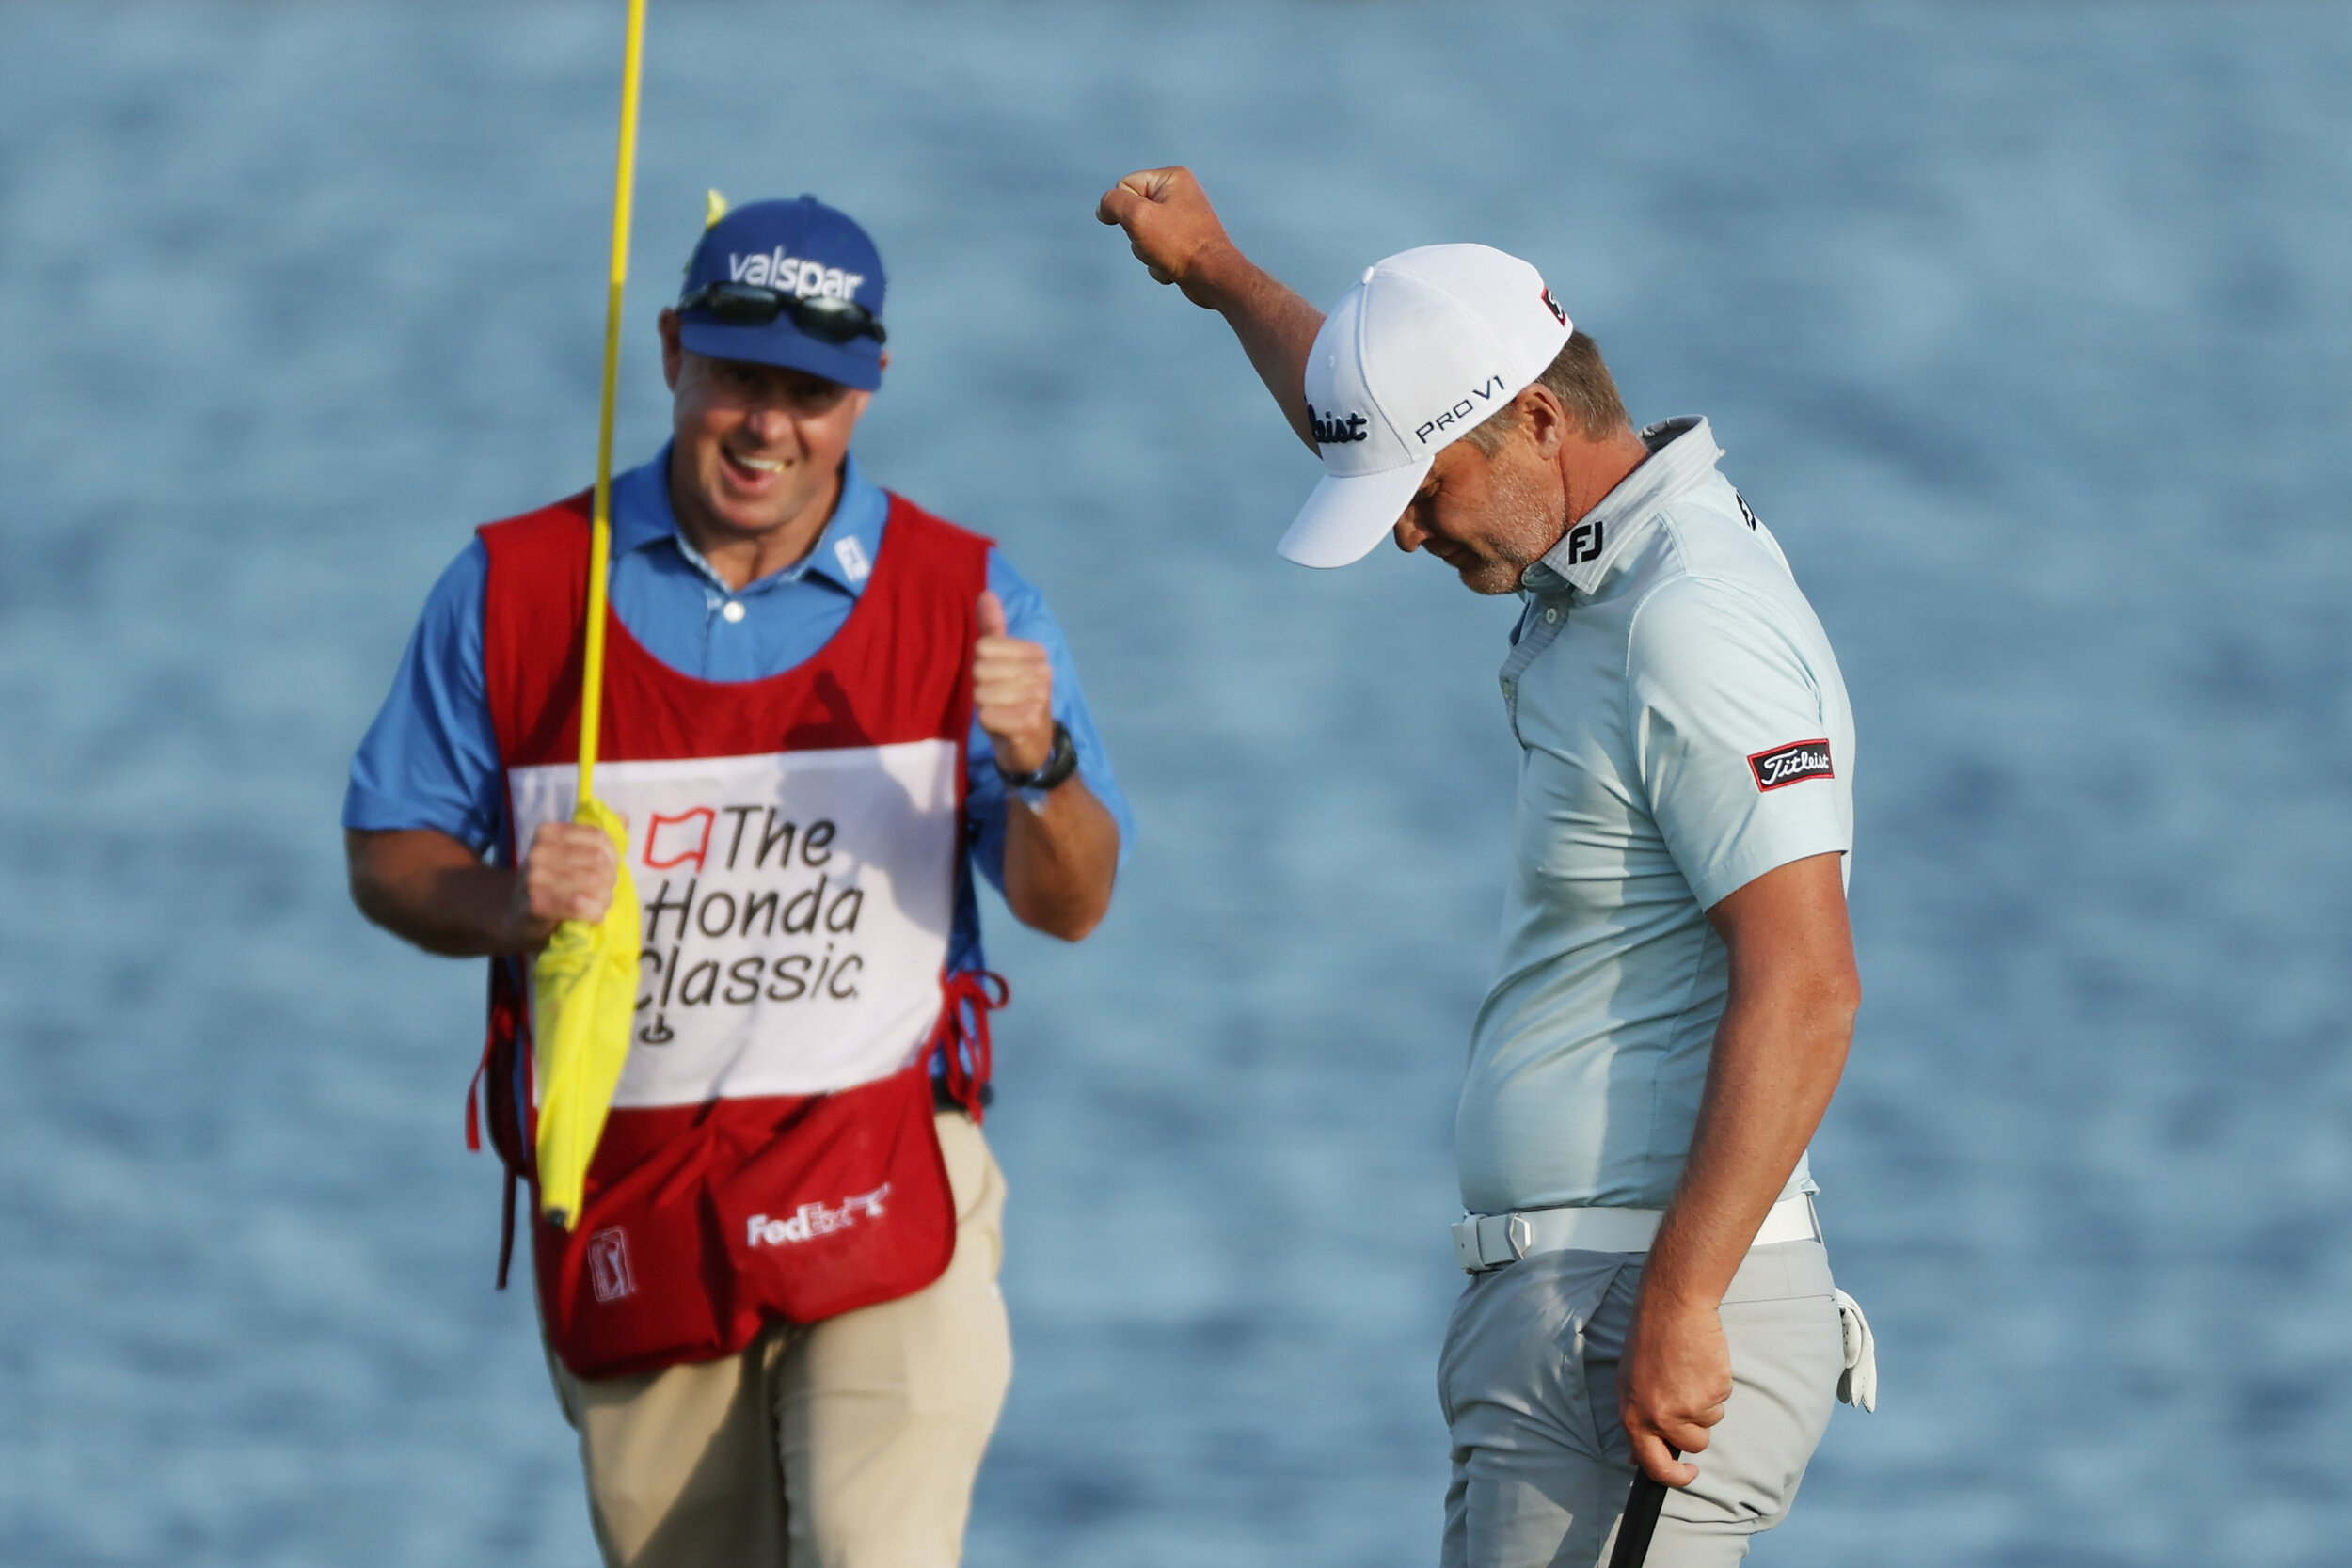  PALM BEACH GARDENS, FLORIDA - MARCH 21: Matt Jones of Australia celebrates with caddie Lance Bailey after winning on the 18th green during the final round of The Honda Classic at PGA National Champion course on March 21, 2021 in Palm Beach Gardens, 